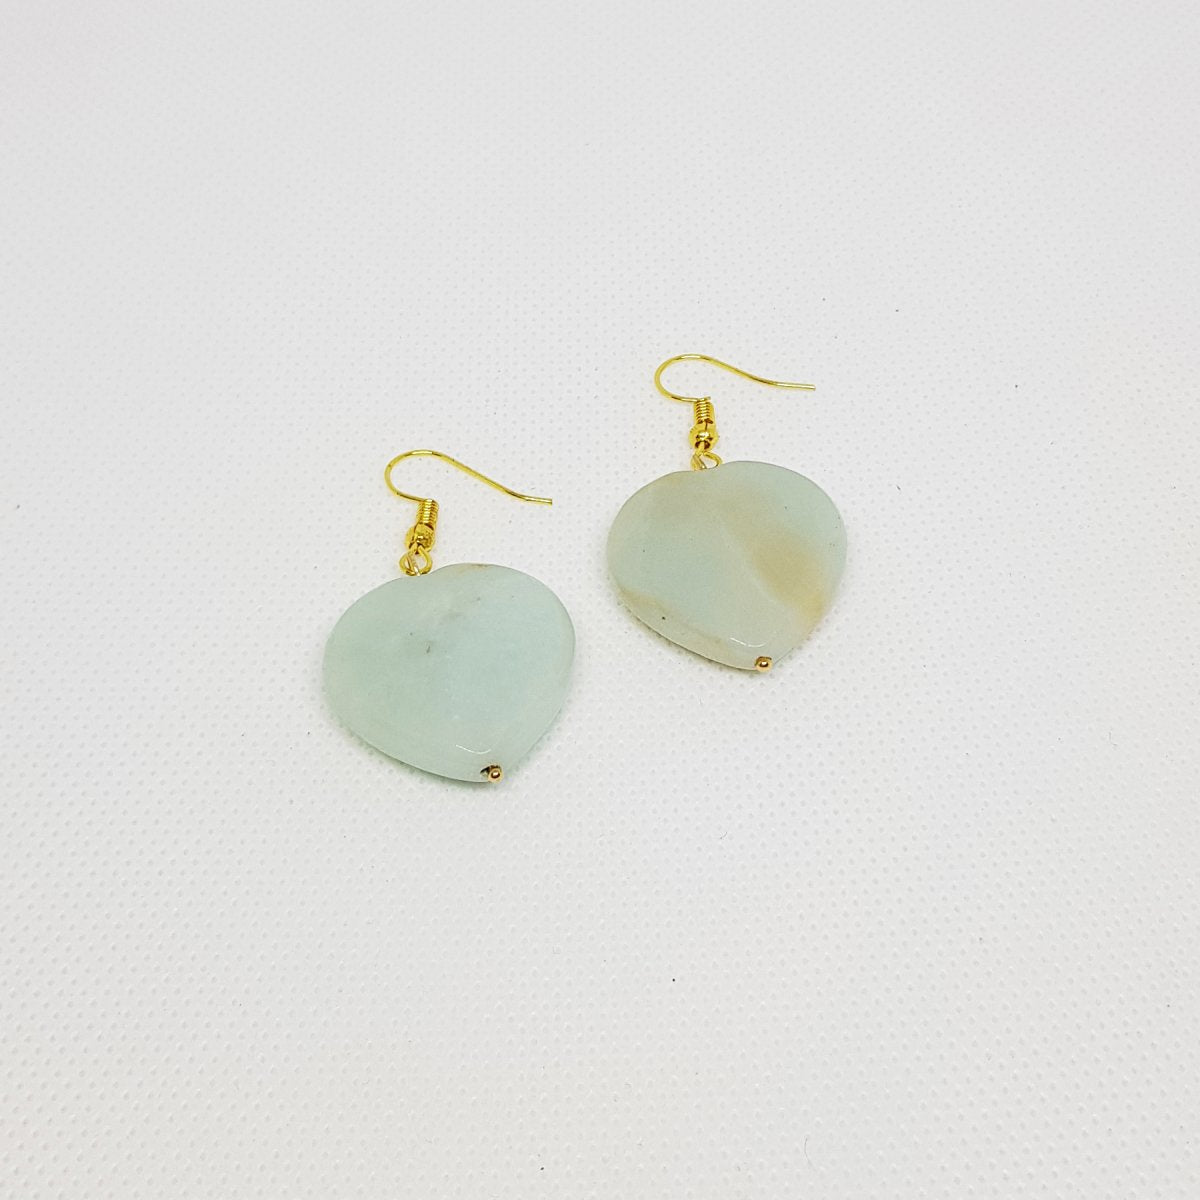 Mix Amazonite Earrings - MCA Design by Maria